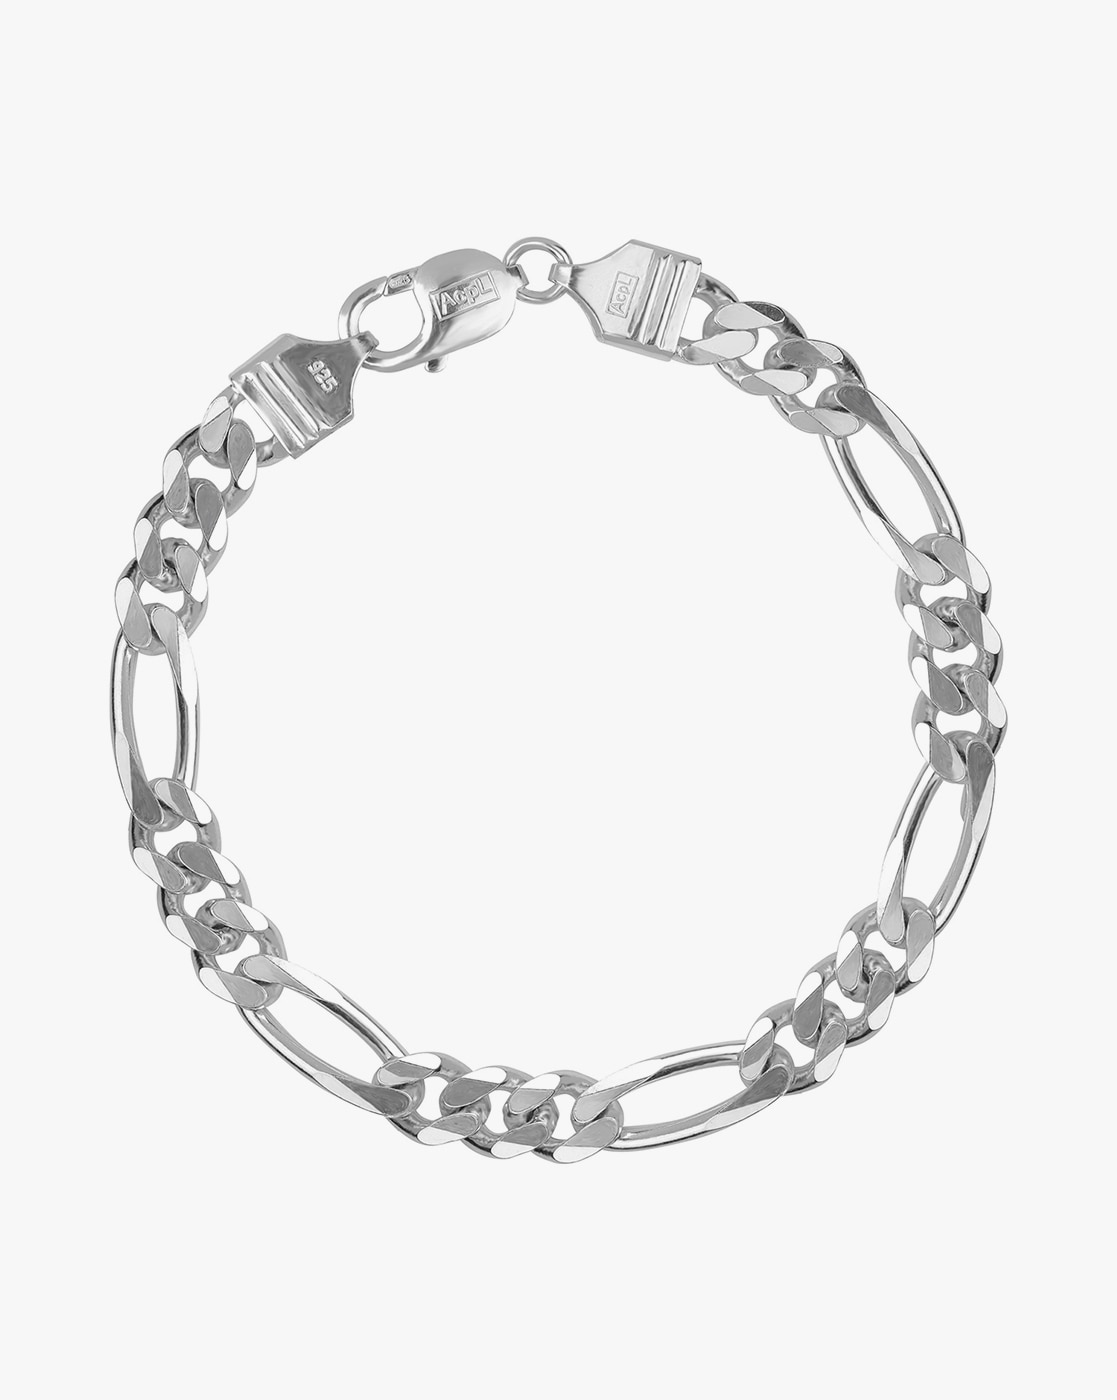 Buy 925 Sterling Silver BIS Hallmarked Curb Chain Bracelets for Men, 8.5  Inches at Amazon.in